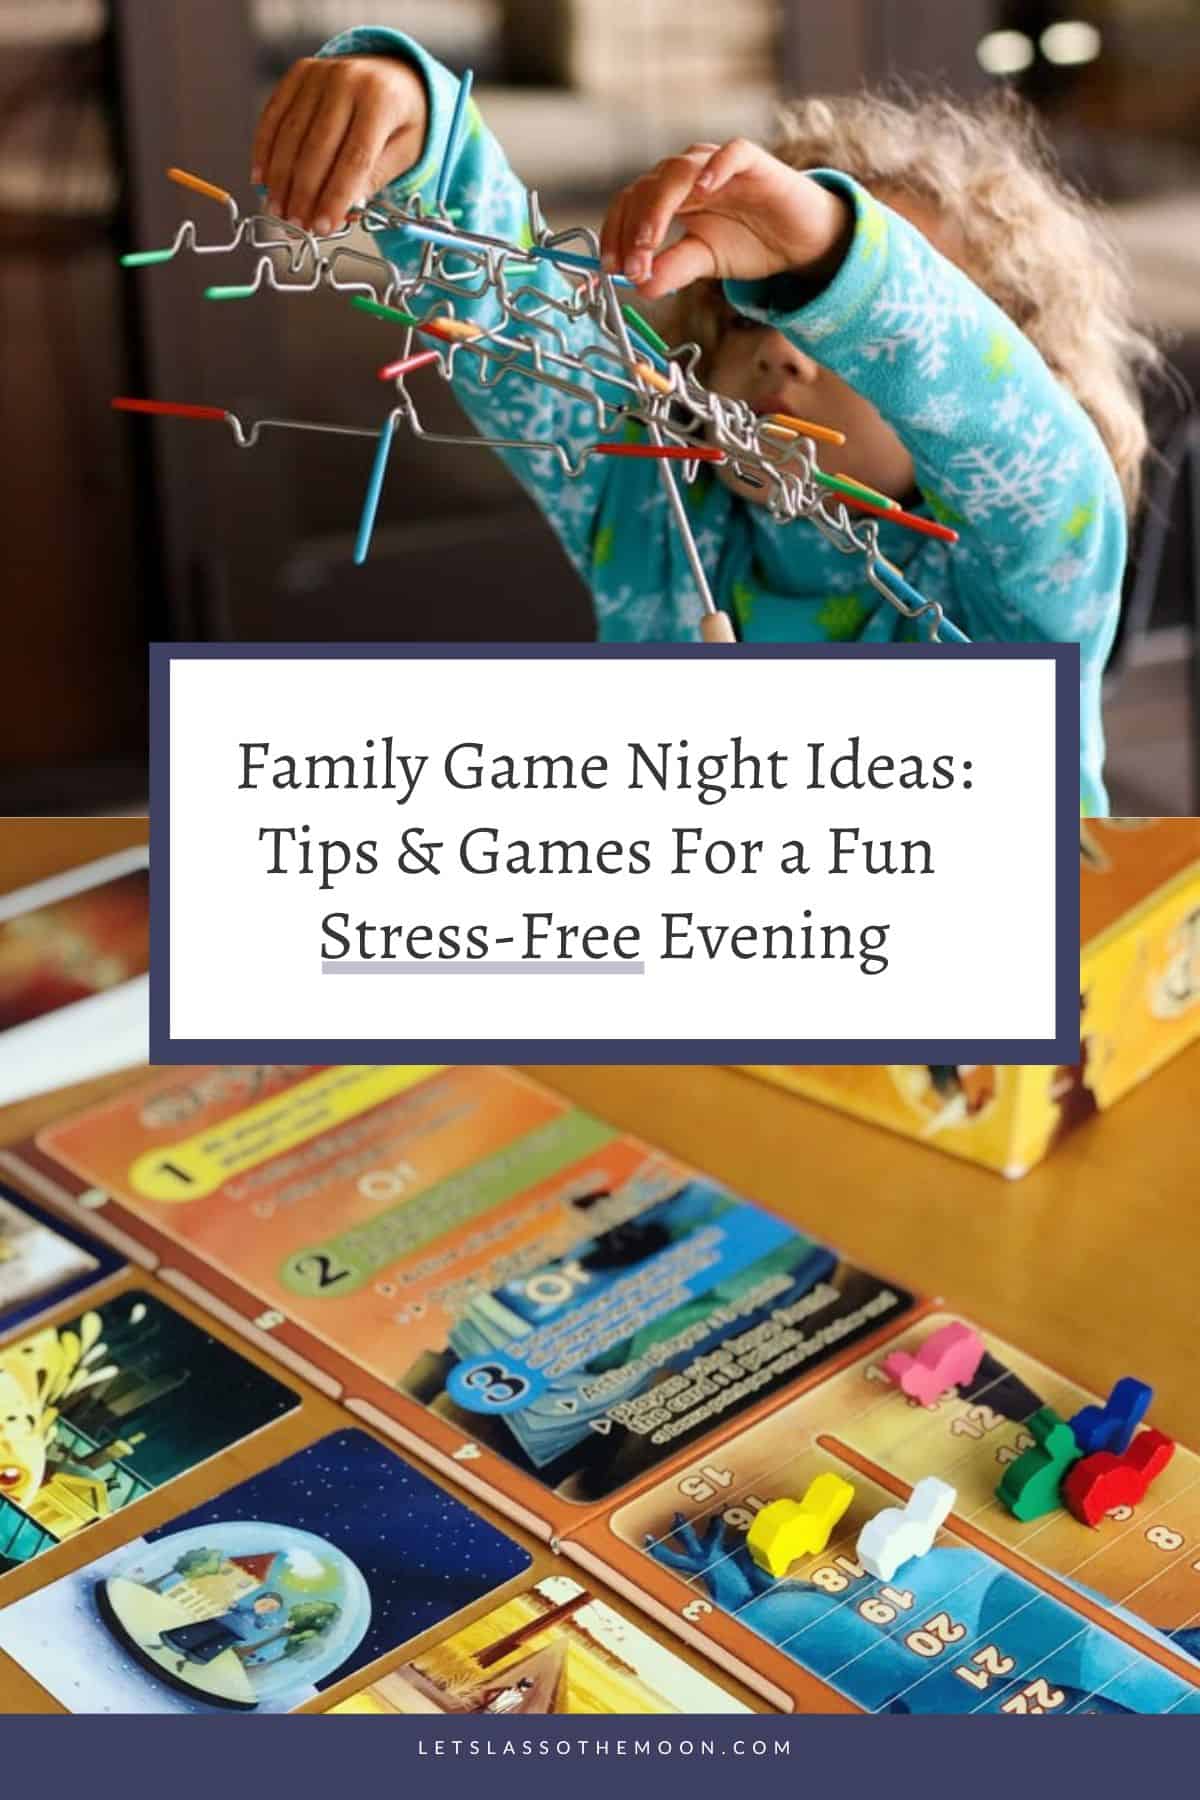 A collage of a young girl playing a game, the board game Dixit set-up for game night, and the article headline to pin for easy Pinterst reference.